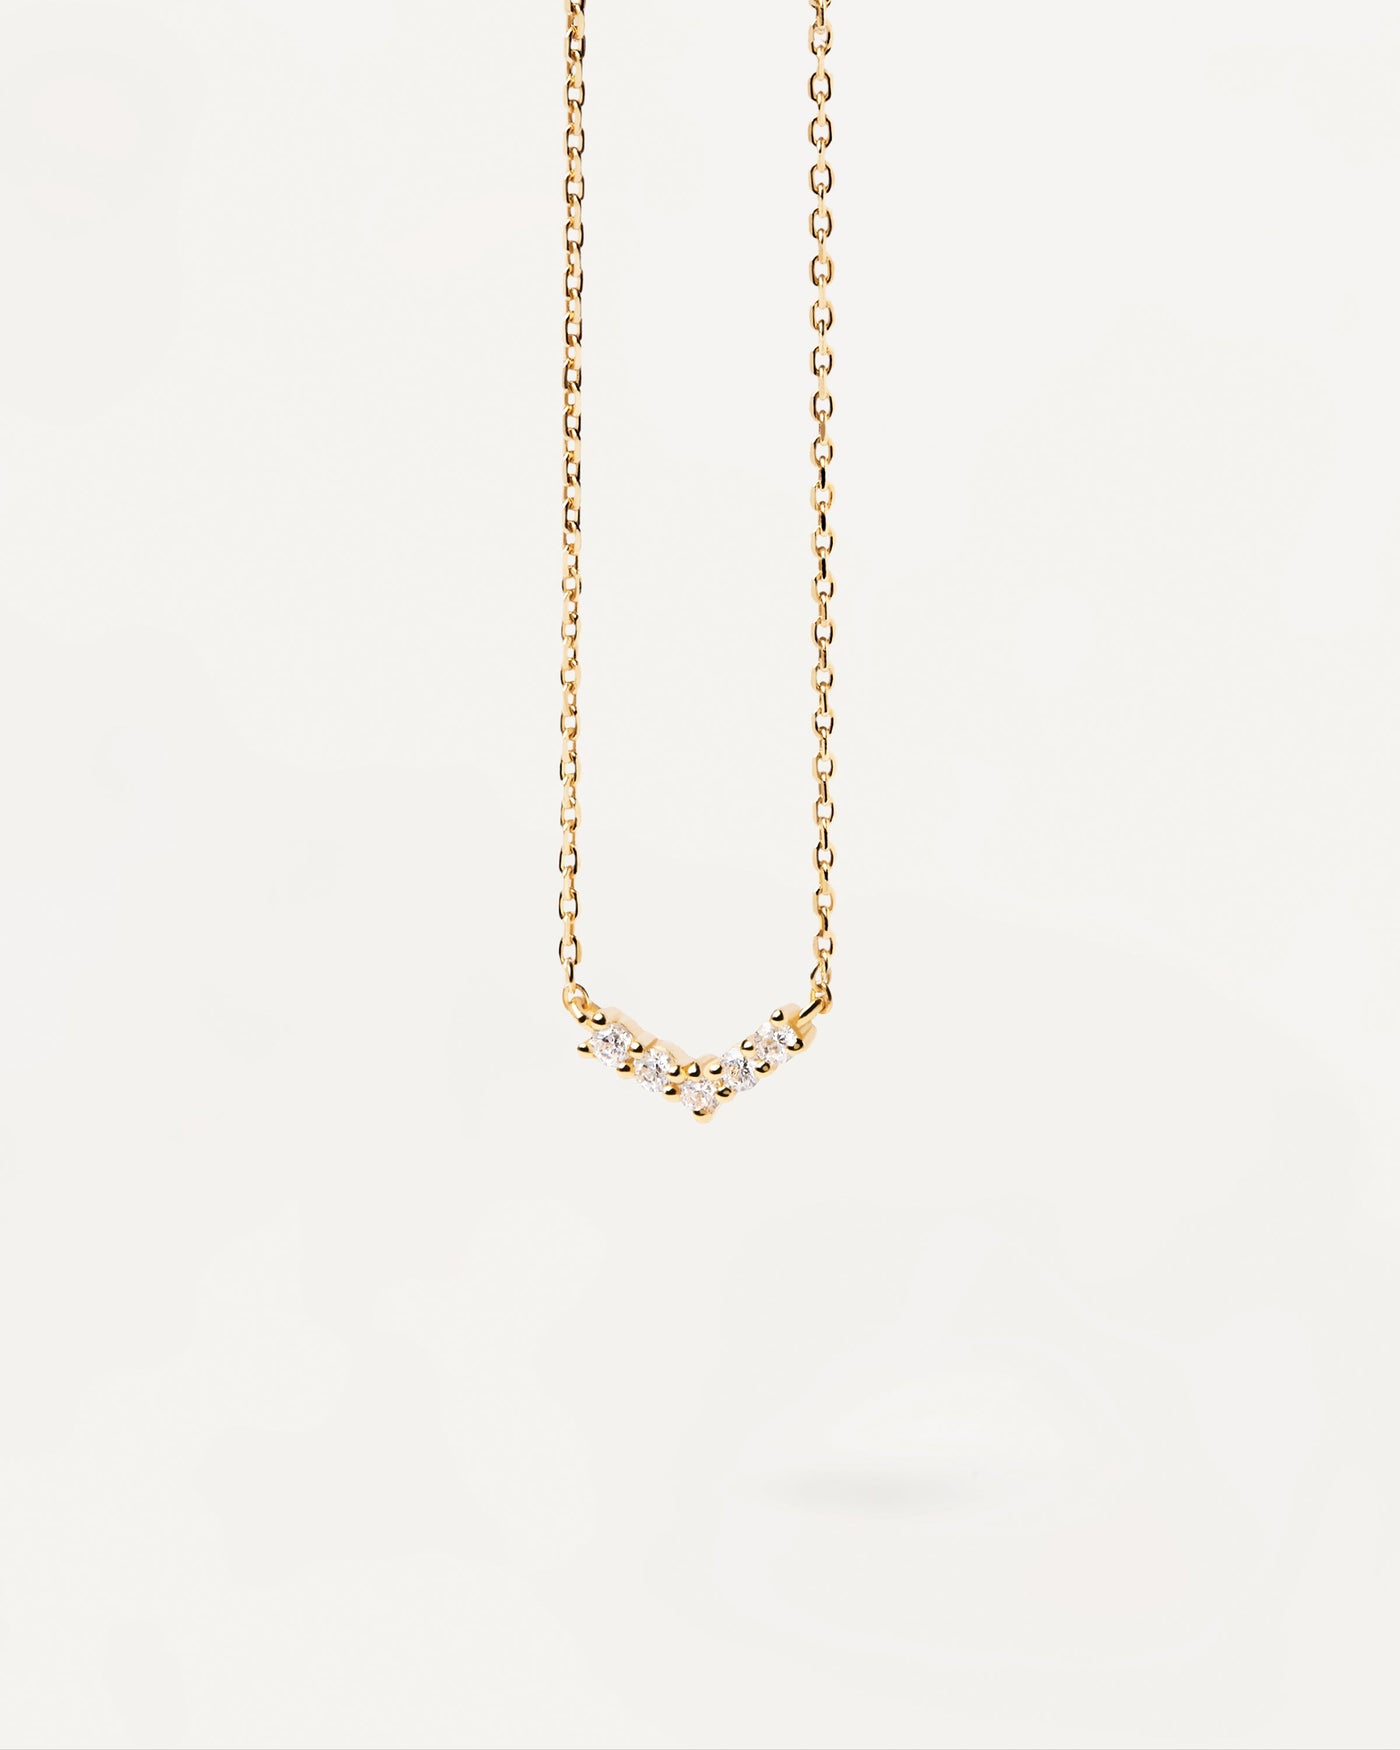 2023 Selection | Mini Crown Necklace. Gold-plated necklace with 3-zirconia pendant in triangle shape. Get the latest arrival from PDPAOLA. Place your order safely and get this Best Seller. Free Shipping.